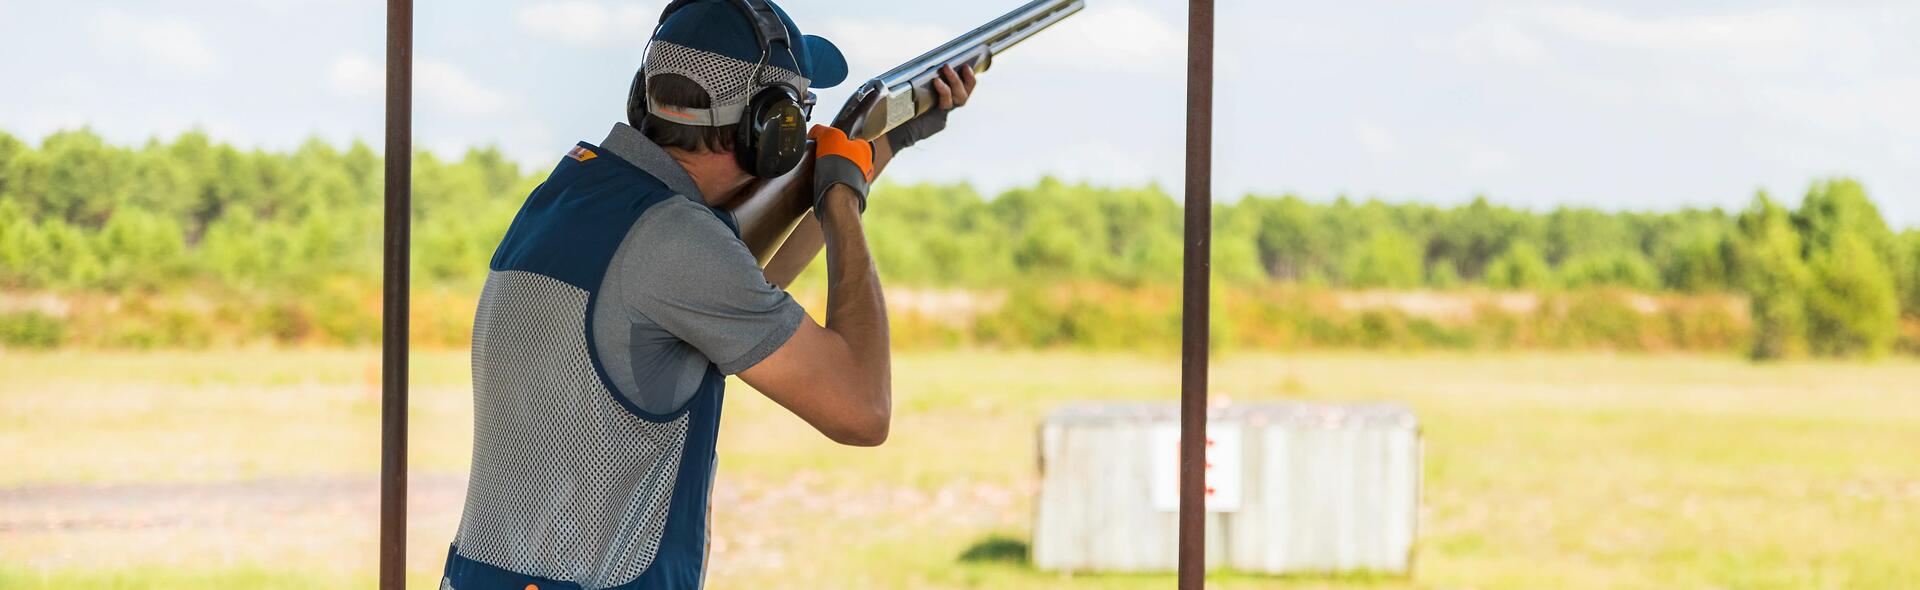 Everything you need to know about compak sporting, a clay pigeon shooting discipline